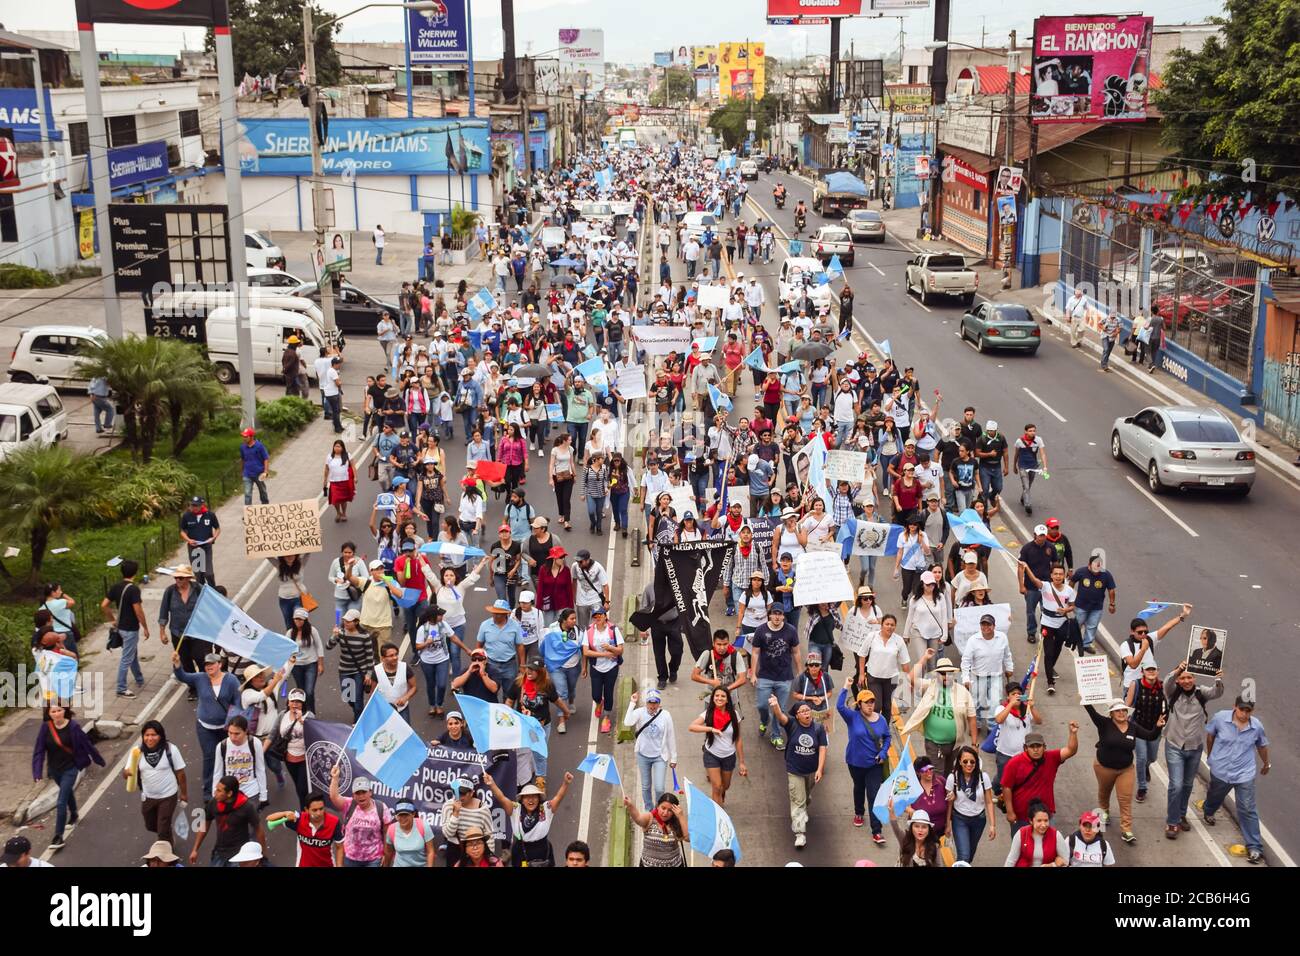 Guatemala City / Guatemala - August 27, 2015: elevated view of mass protest in the streets against the corrupt government of Guatemala Stock Photo